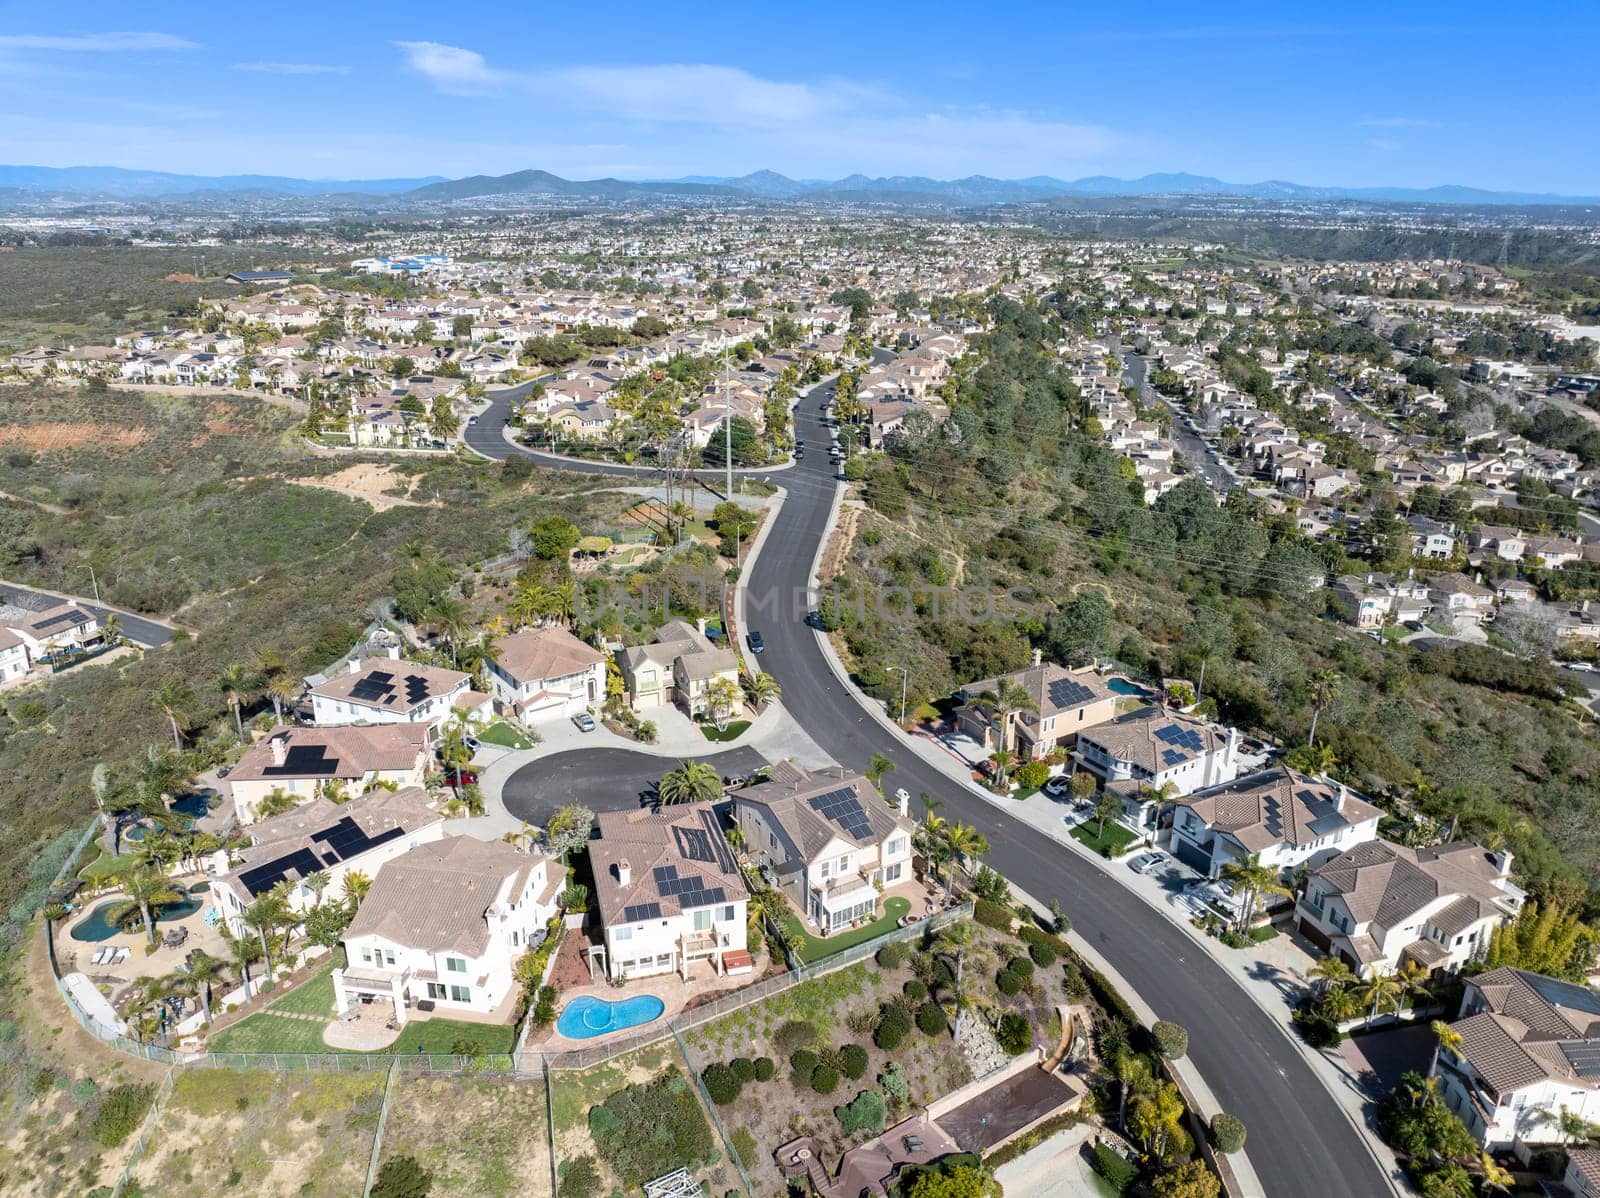 Aerial view of middle class subdivision neighborhood with residential houses in San Diego, California, USA. by Bonandbon